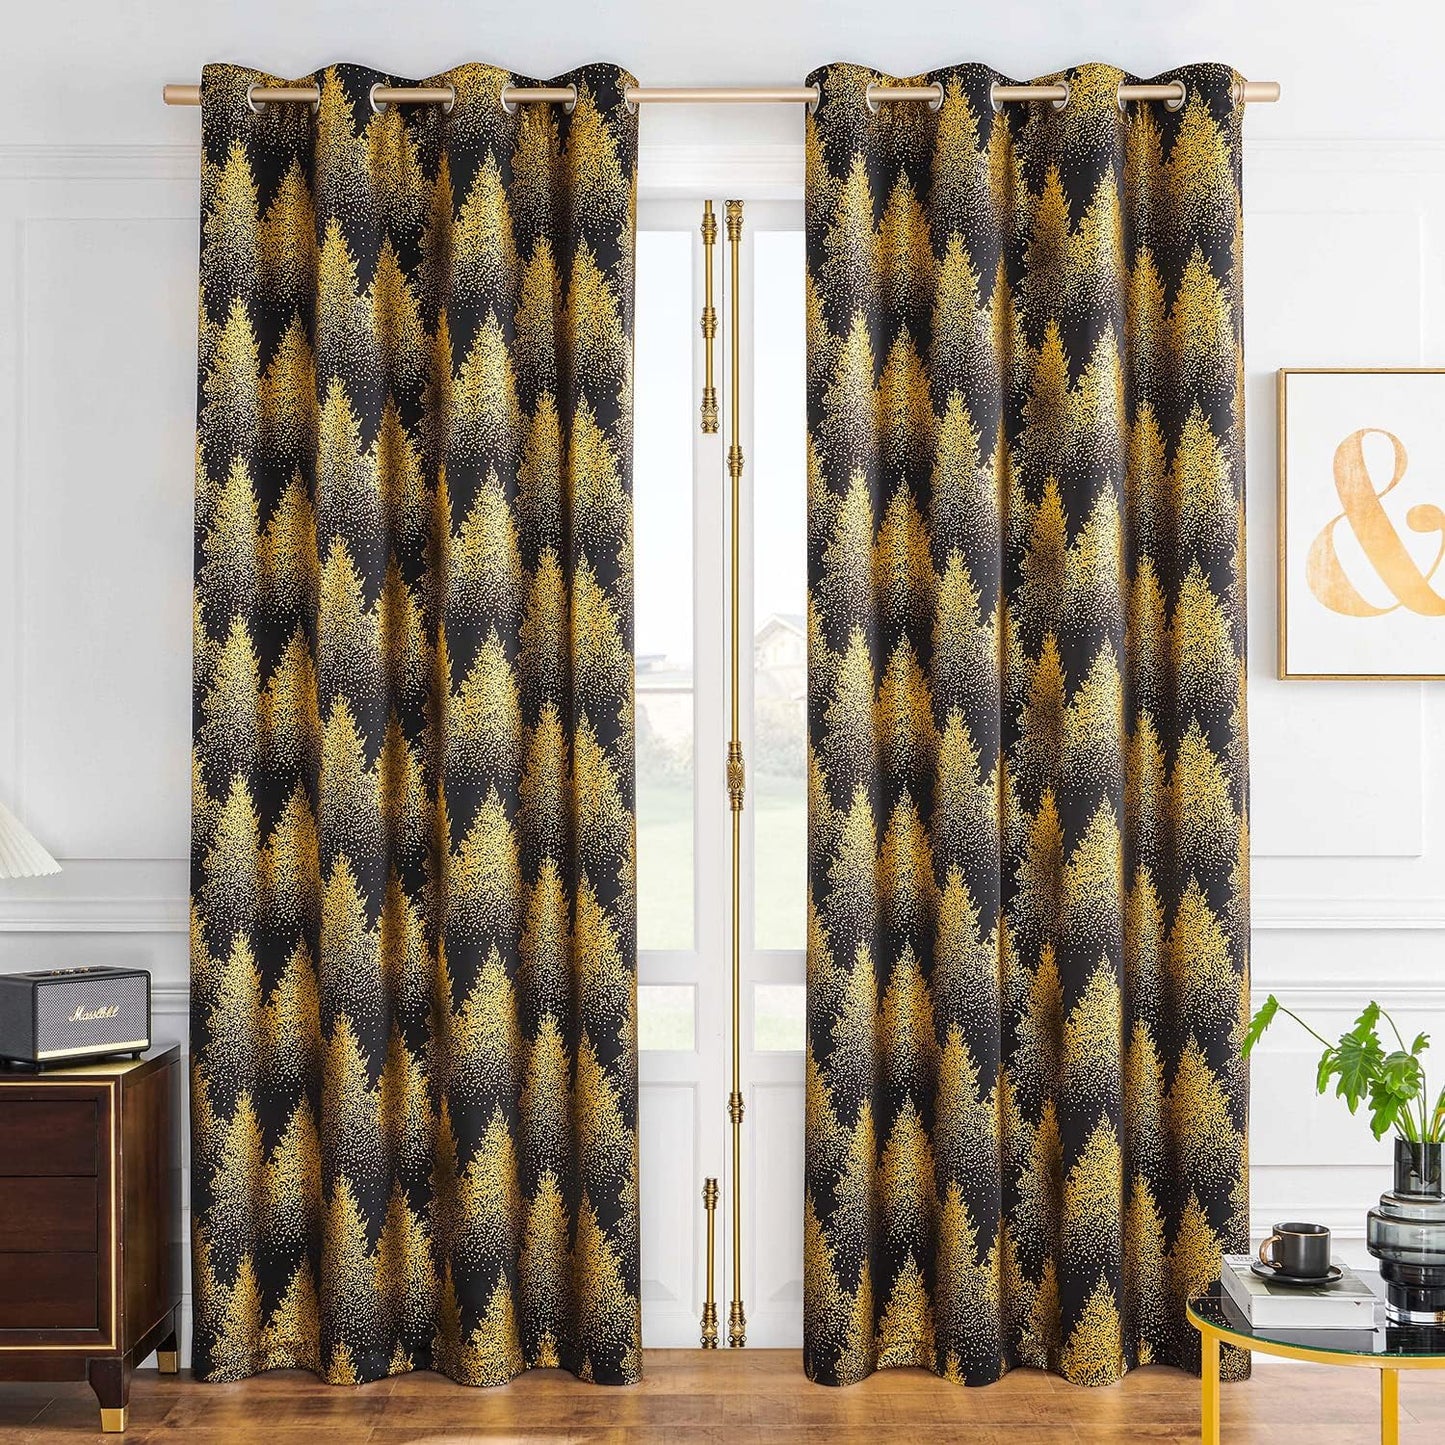 FMFUNCTEX Metallic Tree Blackout Curtains Bedroom Grey 84-Inch Living-Room Branch Print Curtain Panels Forest Triple Weave Thermal Insulated Drapes for Windows Dorm Hotel Grommet Top, 2Panels  Fmfunctex Forest: Gold Black 50"W X 84"L 2Pcs 